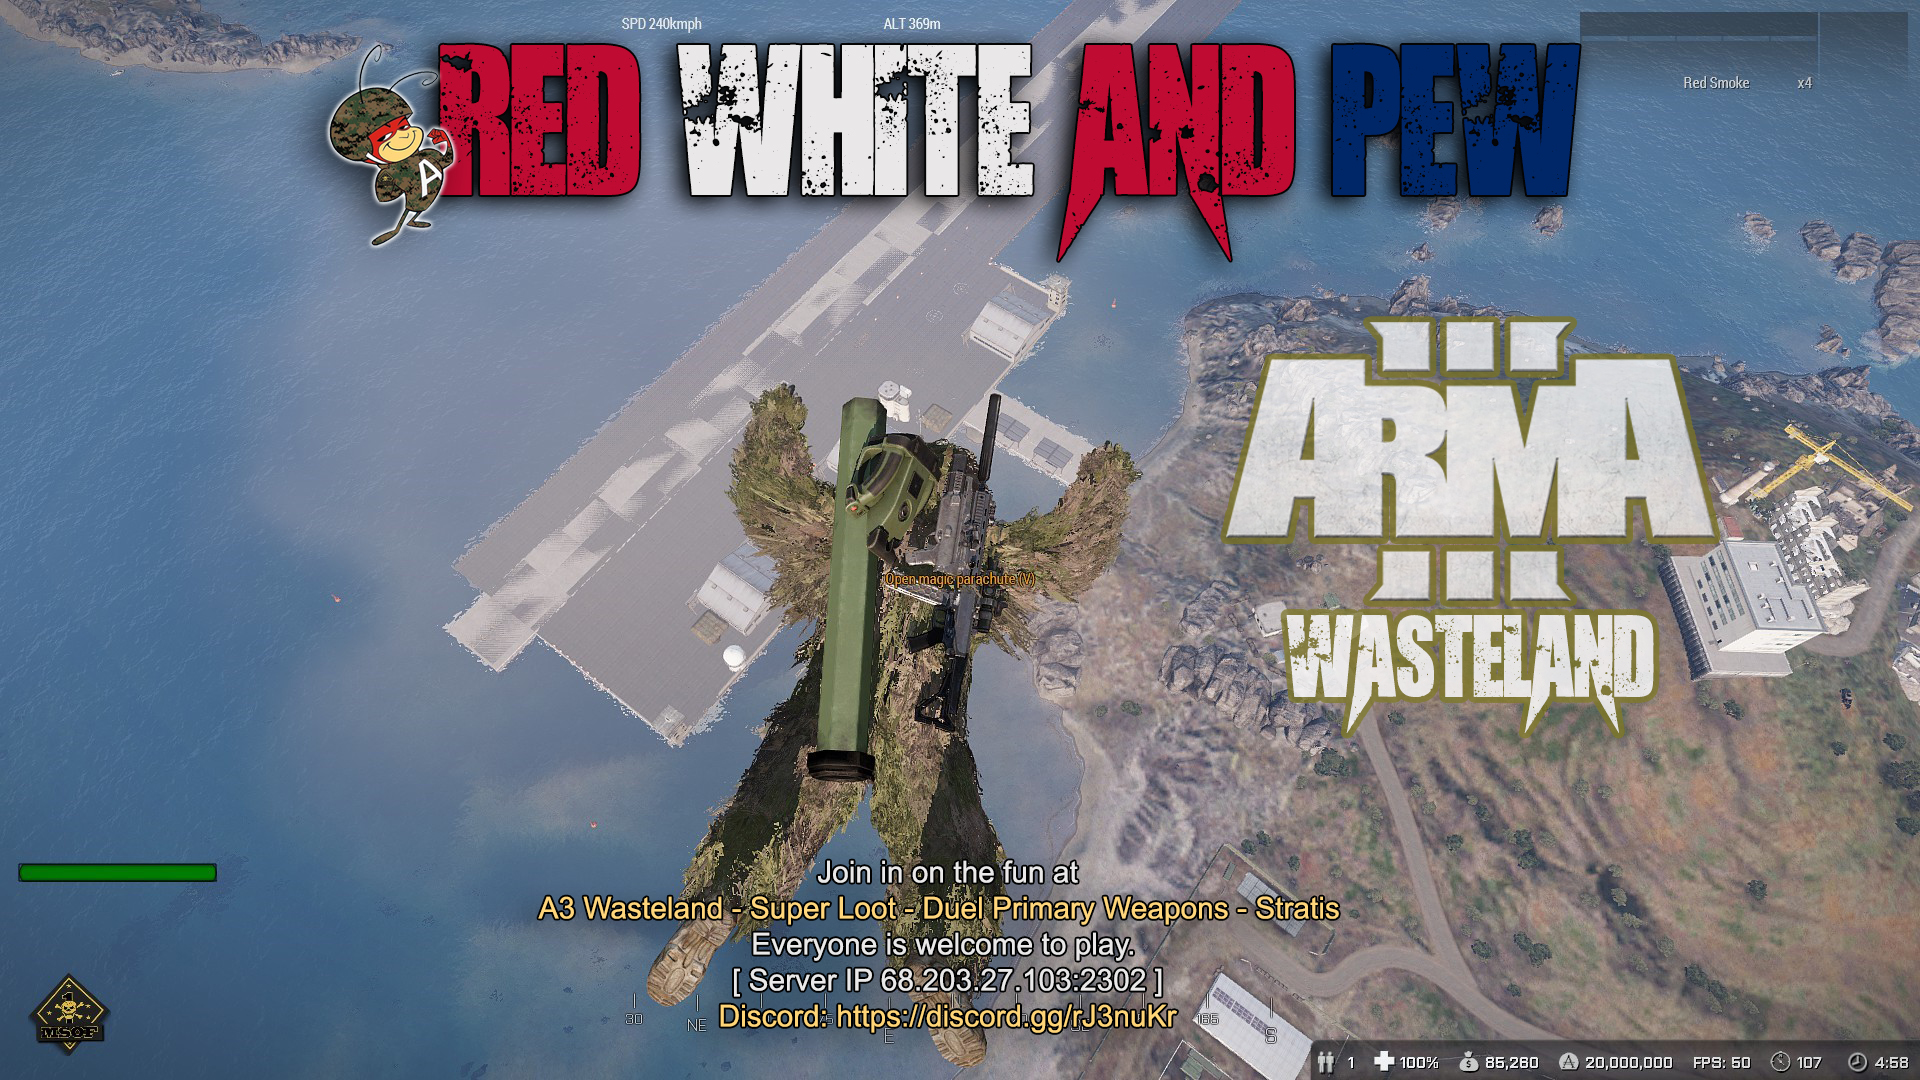 Join in for some Arma 3 PVP Action in Wasteland! Come play and join in at "A3 Wasteland - Super loot - Dual Primary Weapons - Stratis" Everyone is welcome to play. [ Server IP 68.203.27.103:2302